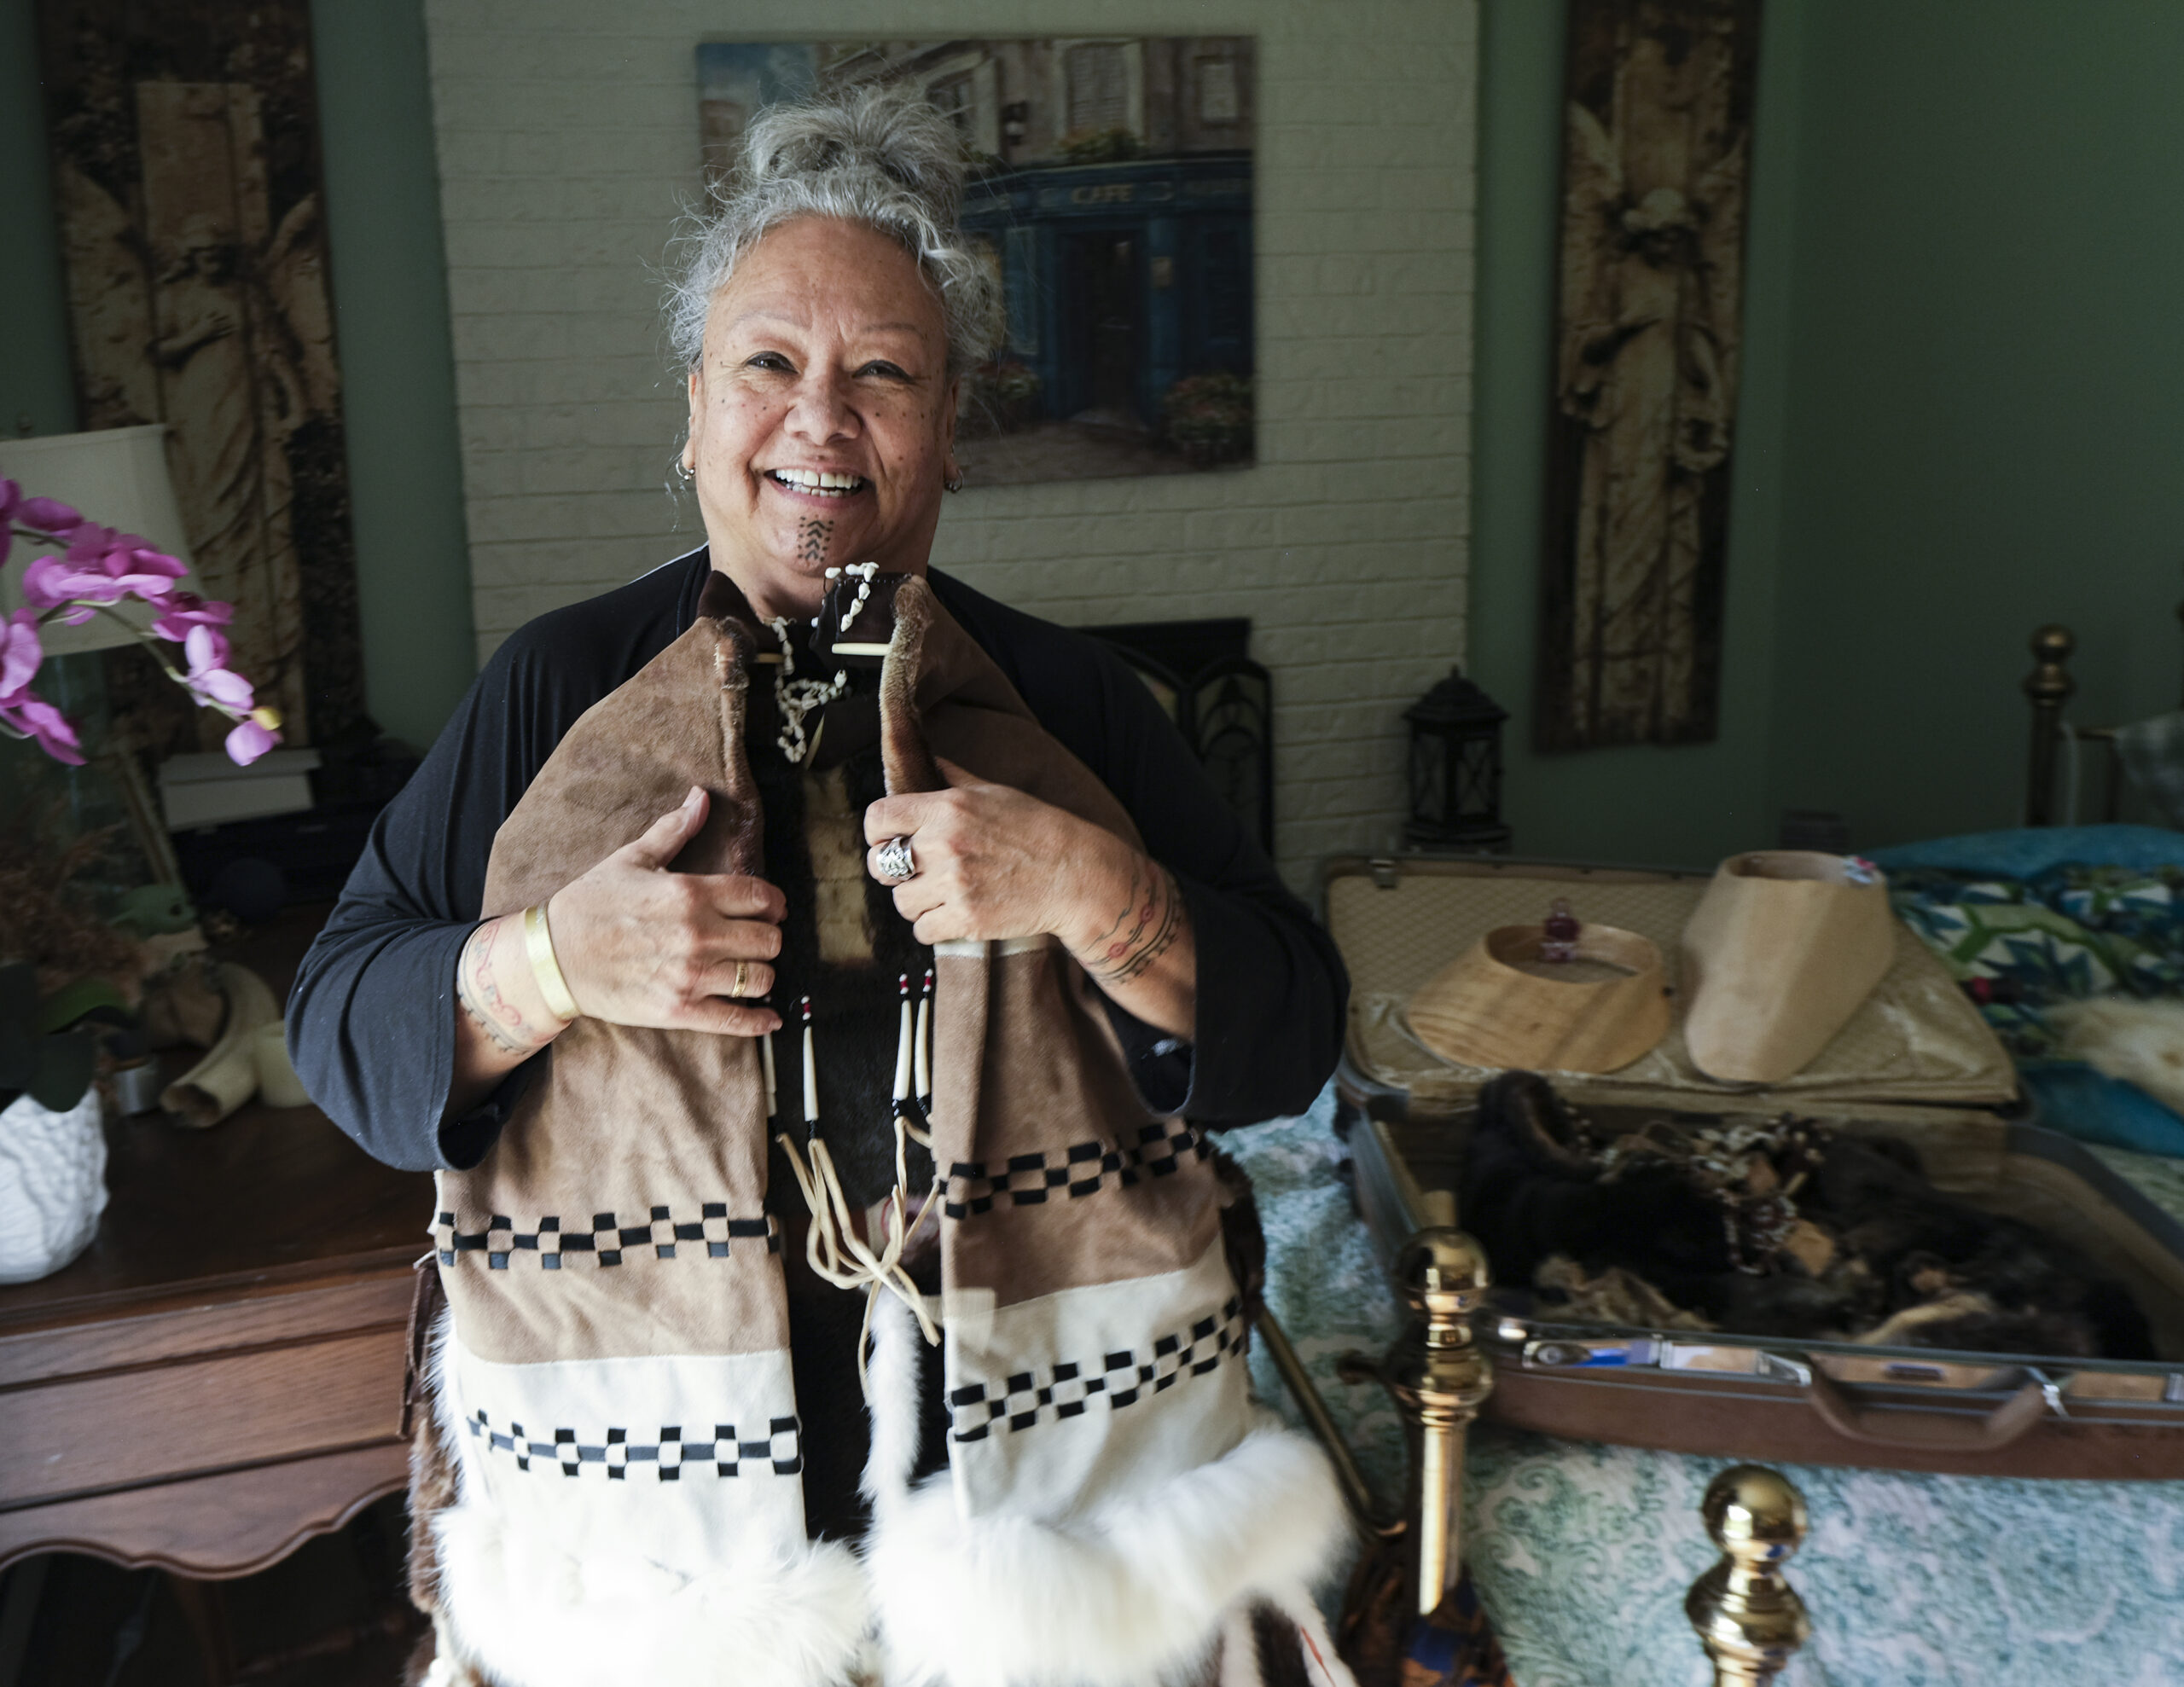 Unangax̂ elder with traditional face and wrist tattoos, holding her hand-stitched dance regalia.